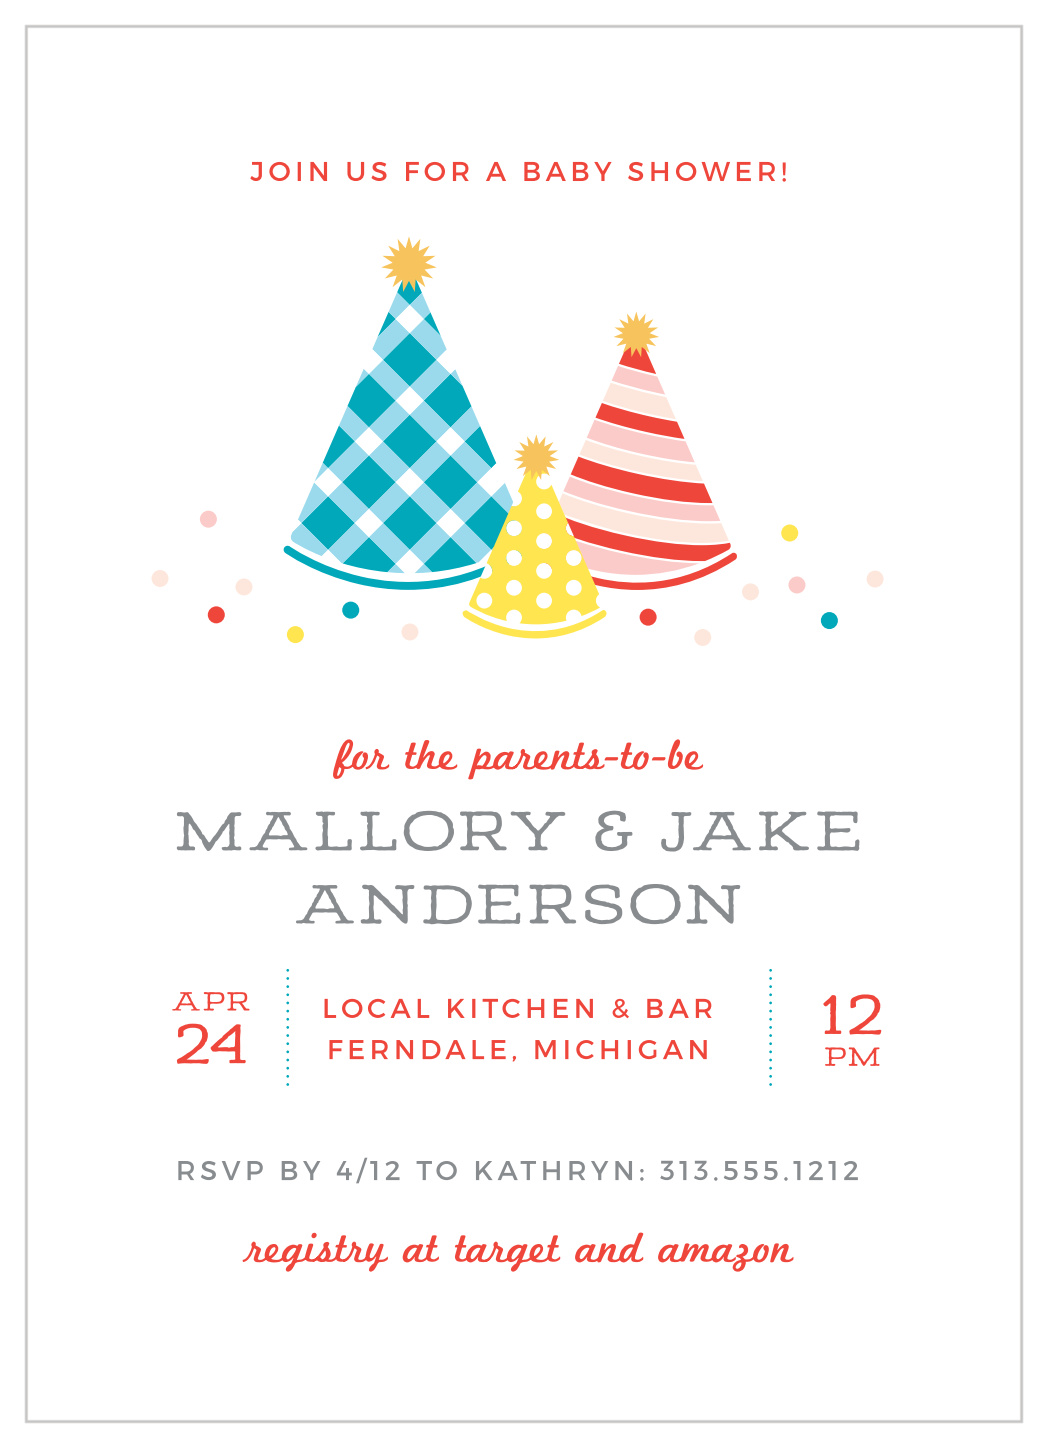 Party of Three Baby Shower Invitations